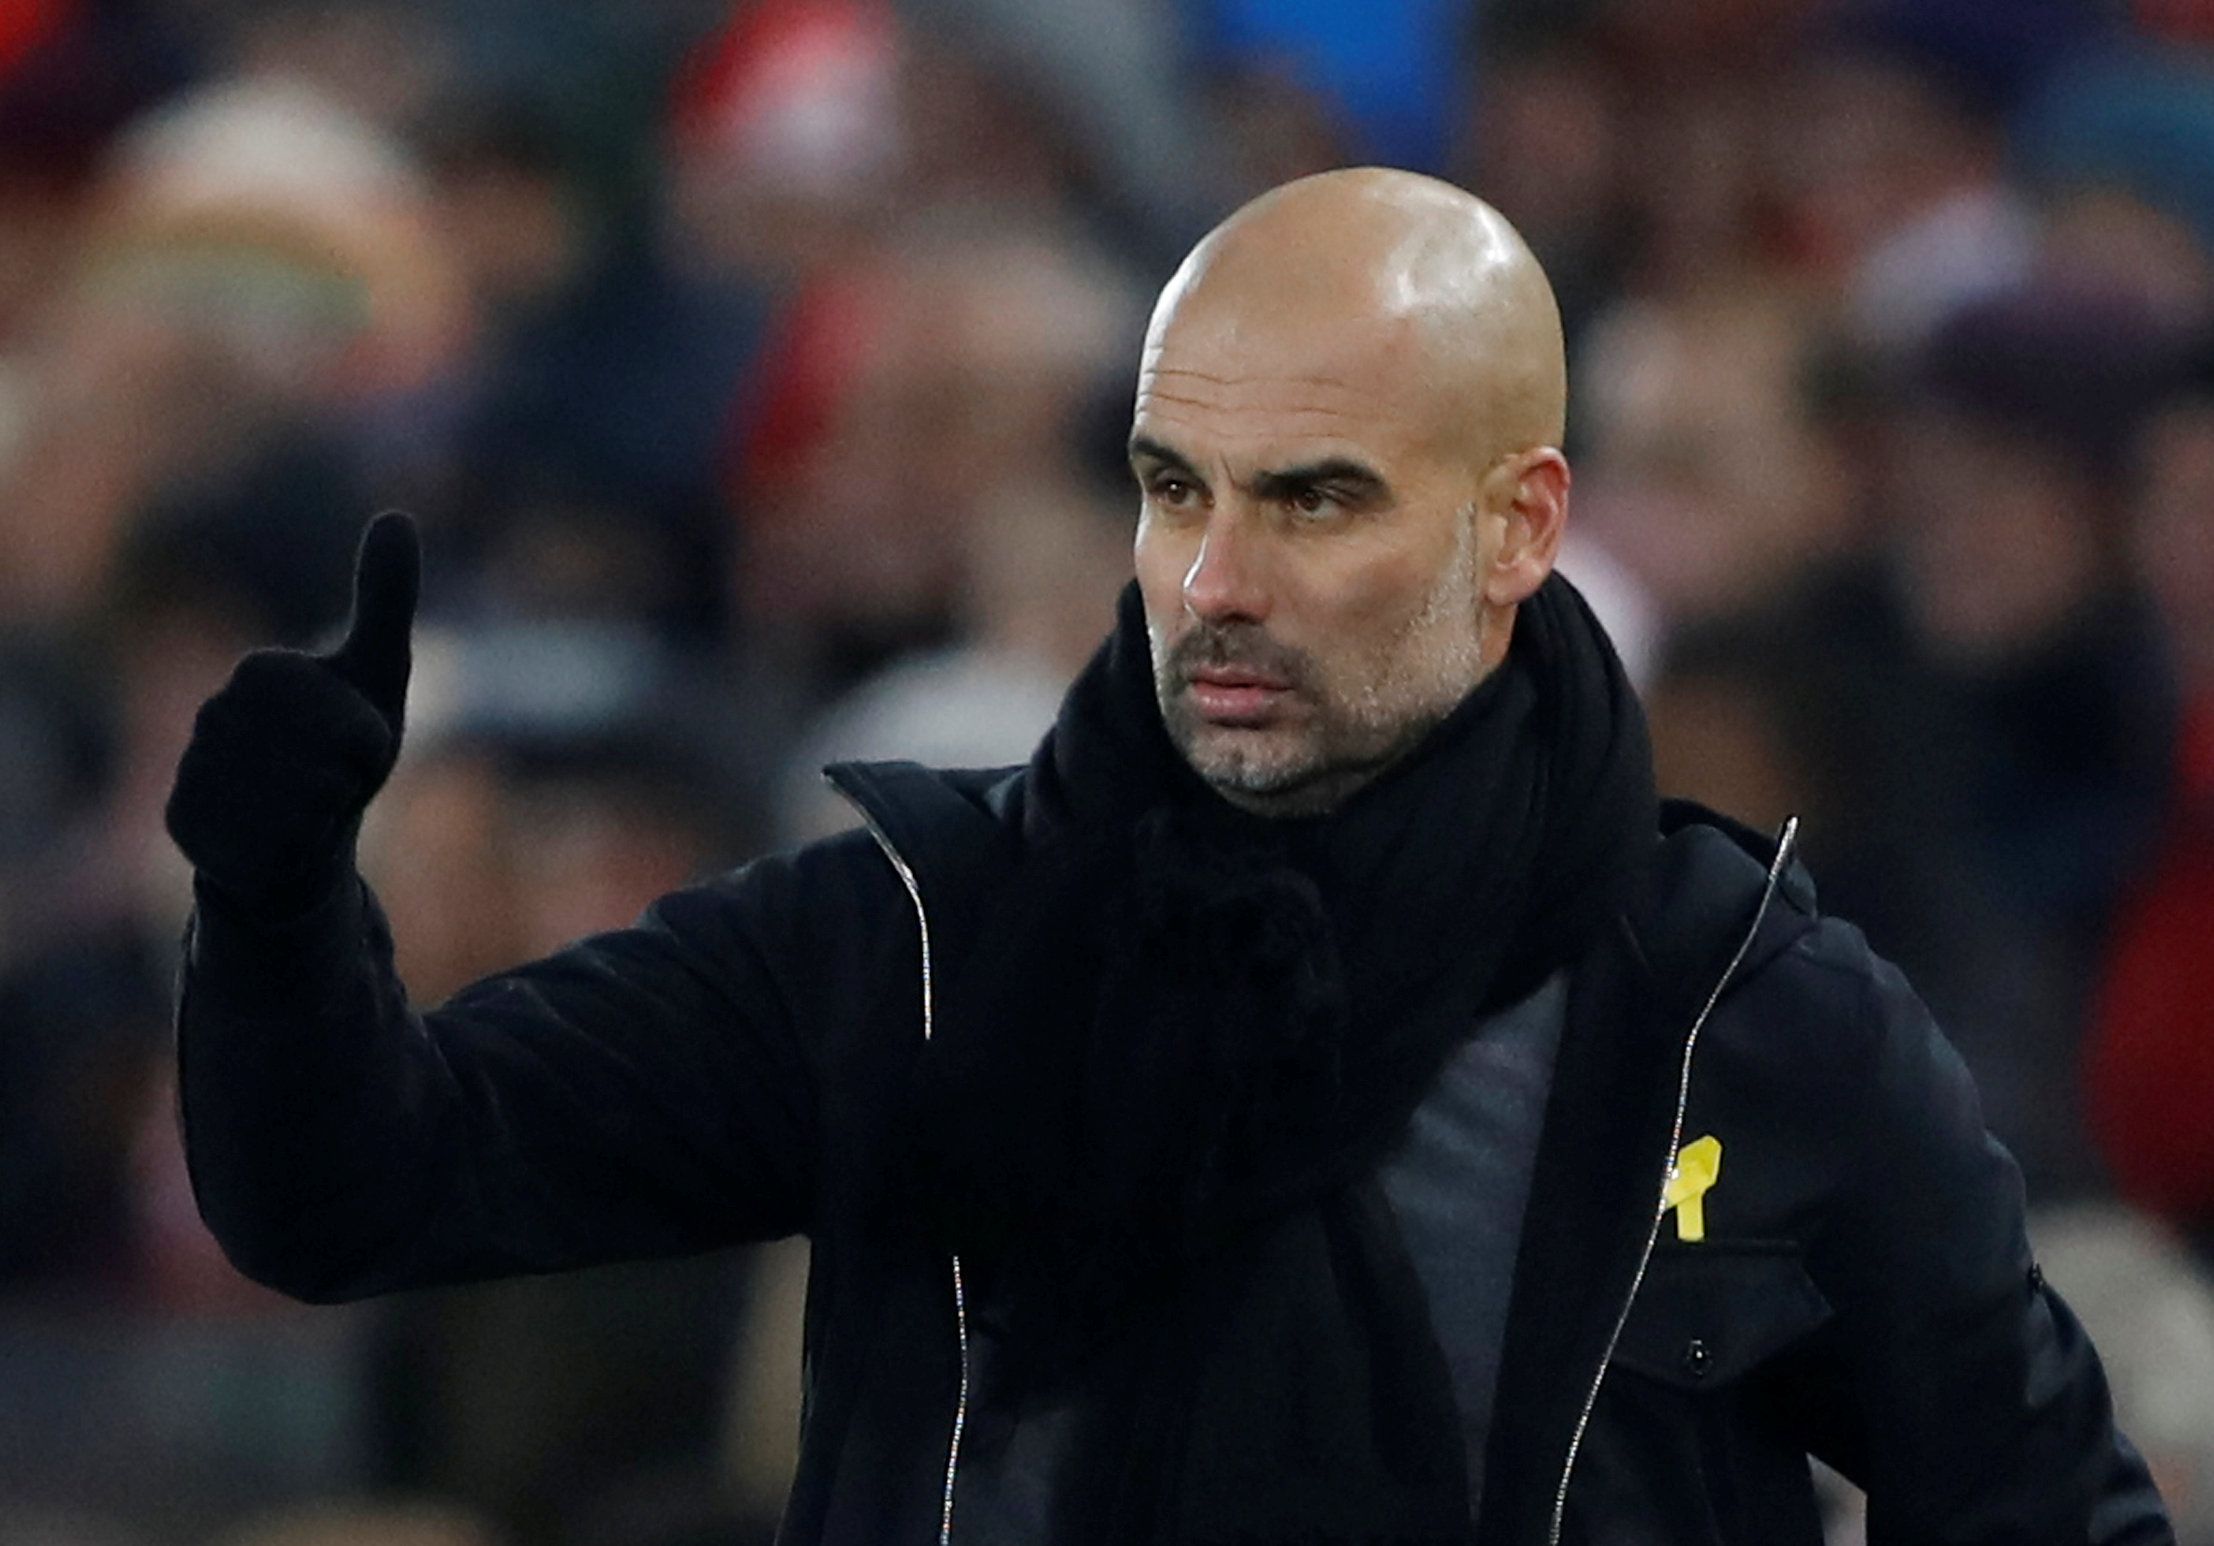 Soccer Football - Premier League - Liverpool vs Manchester City - Anfield, Liverpool, Britain - January 14, 2018   Manchester City manager Pep Guardiola gestures   Action Images via Reuters/Carl Recine    EDITORIAL USE ONLY. No use with unauthorized audio, video, data, fixture lists, club/league logos or 